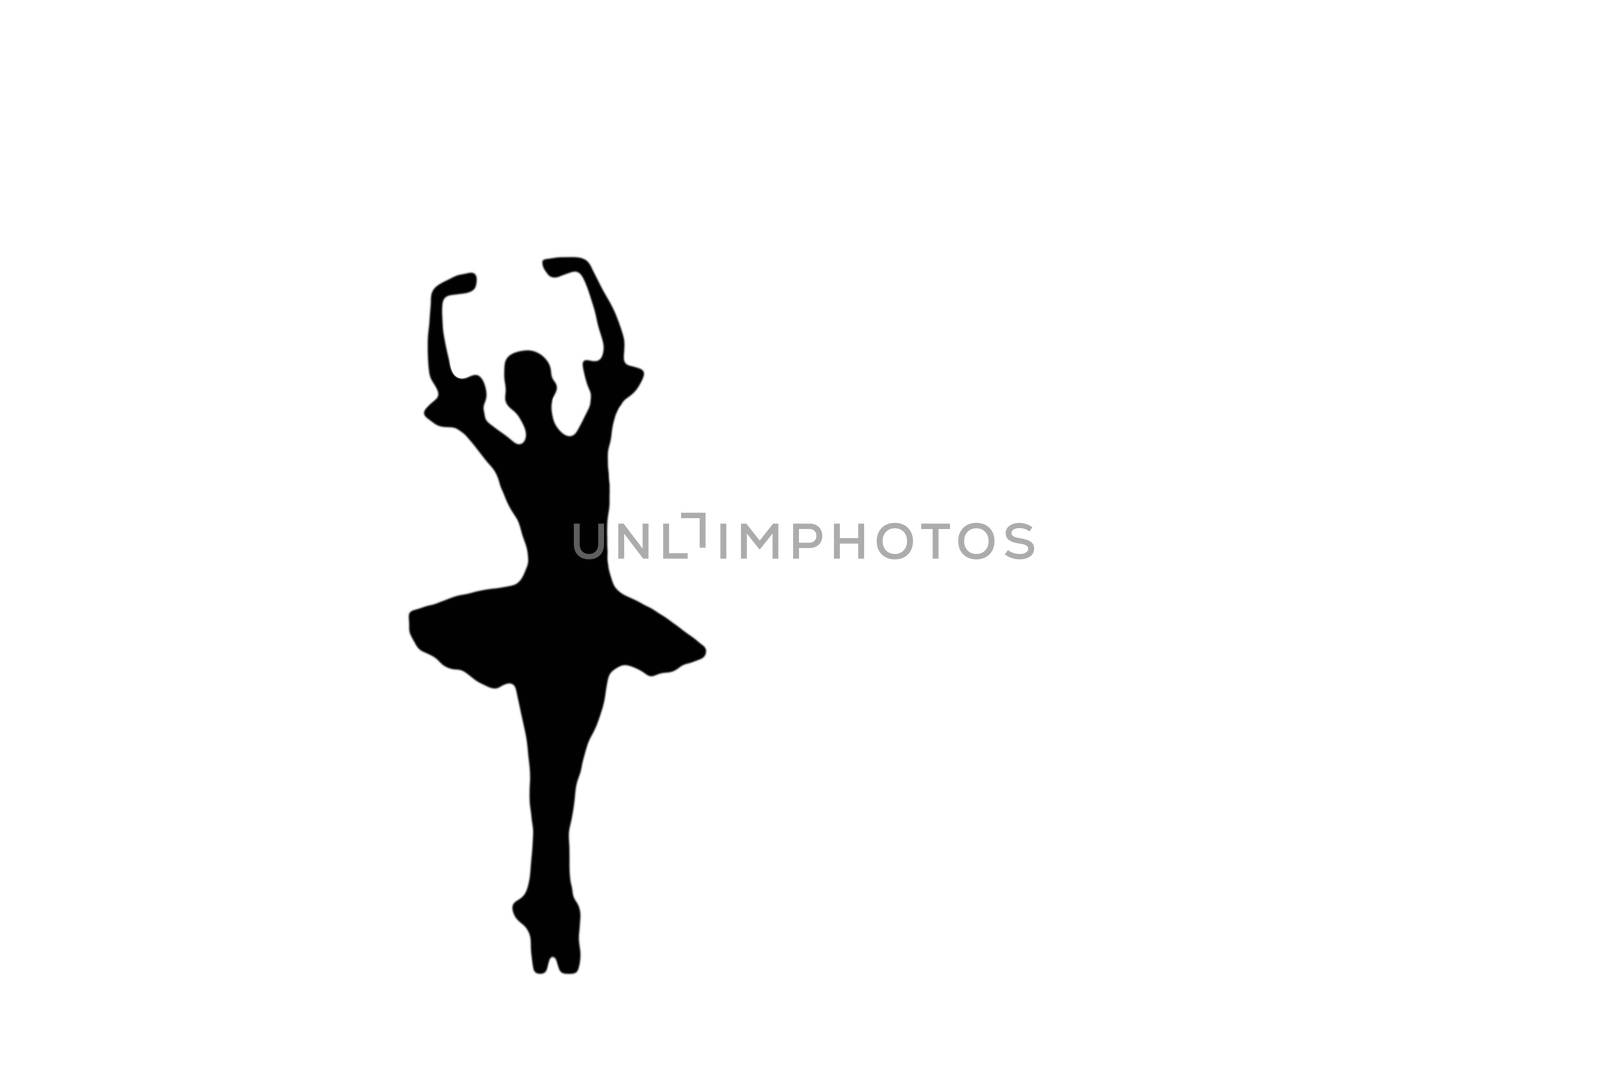 elegant ballet girl dancing on pointe shoes and raising her arms dark shadow silhouette isolated on a white background by charlottebleijenberg